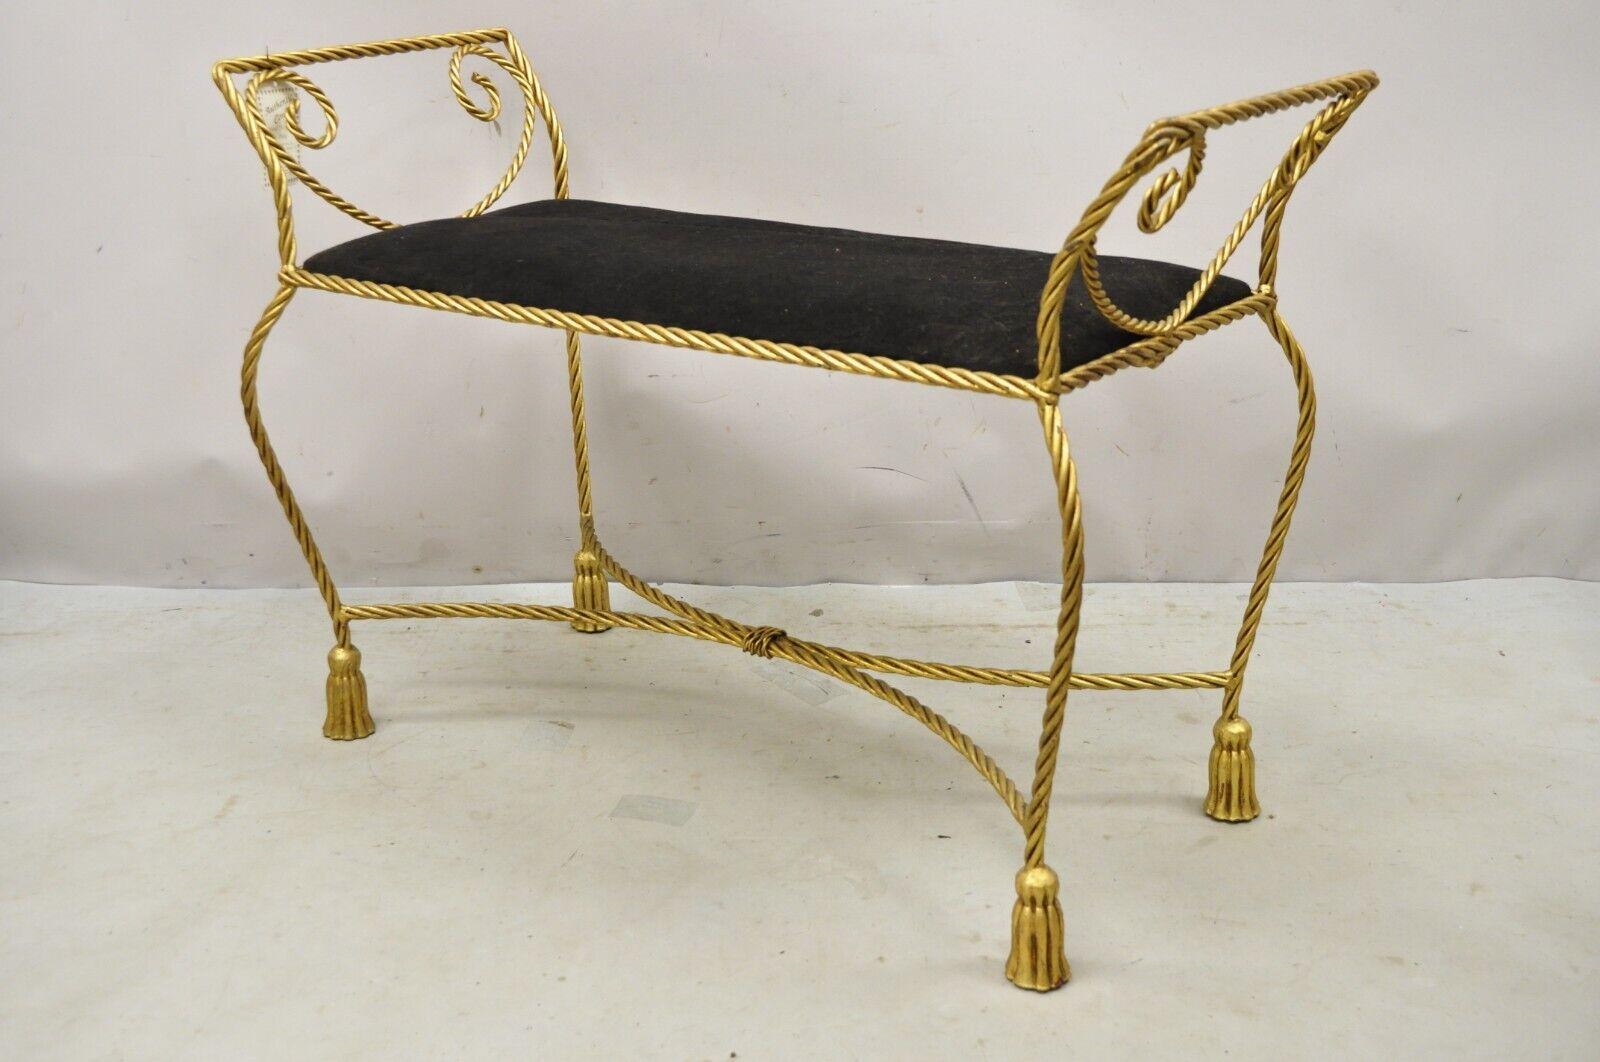 Vintage Italian Hollywood Regency Iron Rope & Tassel Gold Gilt Leaf Bench with Black Seat. Item features a scrolling iron frame, gold gilt finish, rope and tassel design, very nice vintage item, quality Italian craftsmanship, great style and form.